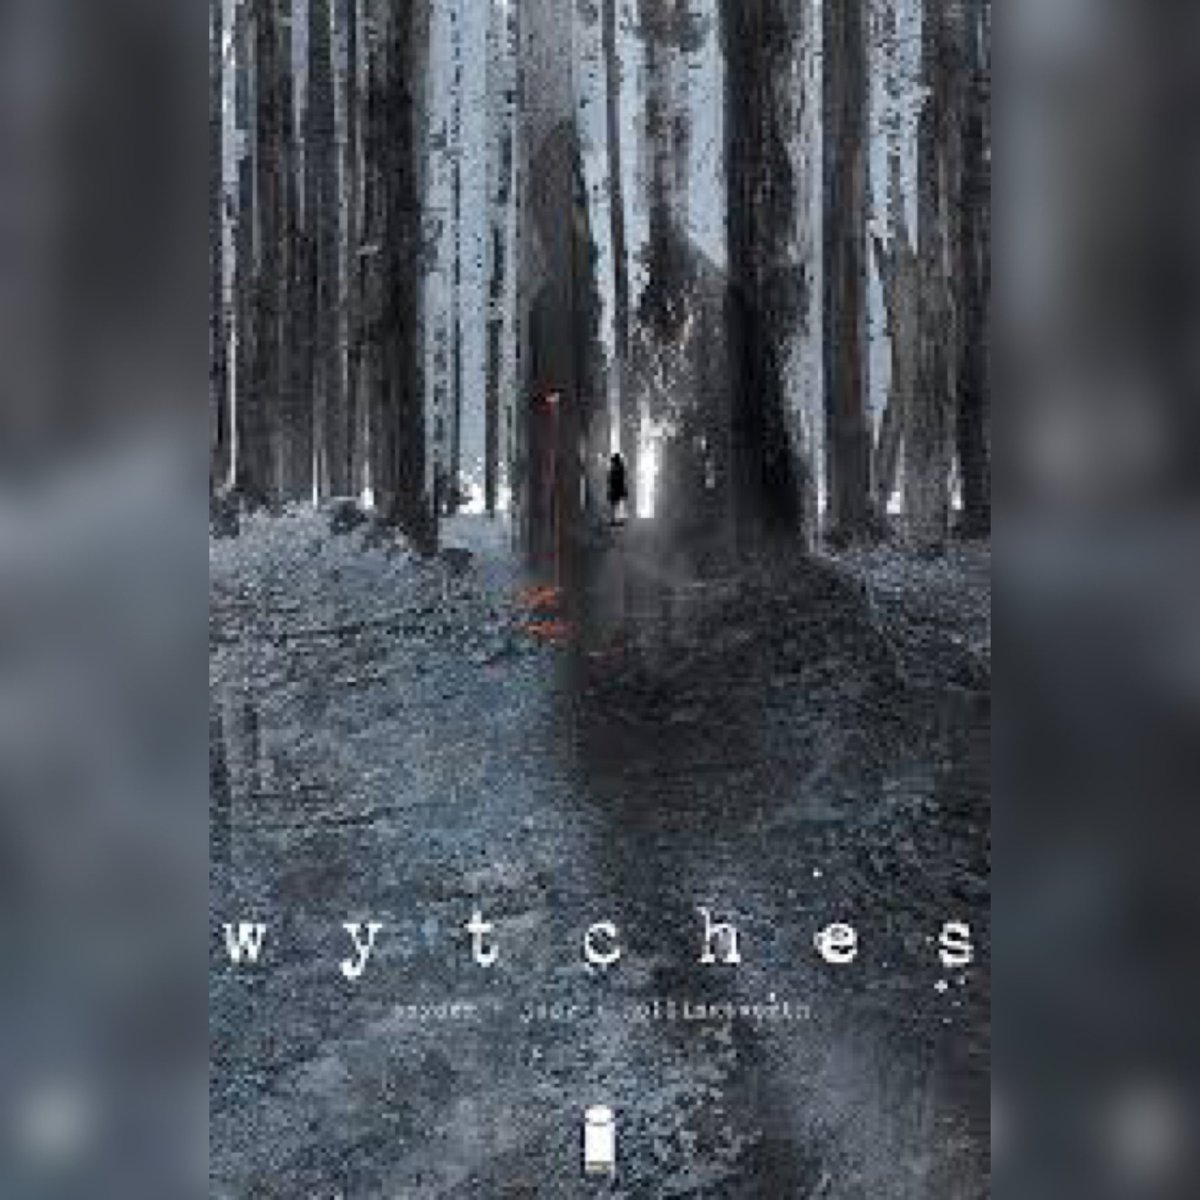 These @jeffreyhoward33 screenwriting zoomclasses should be a boon for those looking to learn or hone their knowledge and craft.

Psyched for the upcoming @Ssnyder1835 @Jock4twenty WYTCHES animated series he’s helping spawn (post WGA strike). Promised is…

bleedingcool.com/tv/wytches-sco…